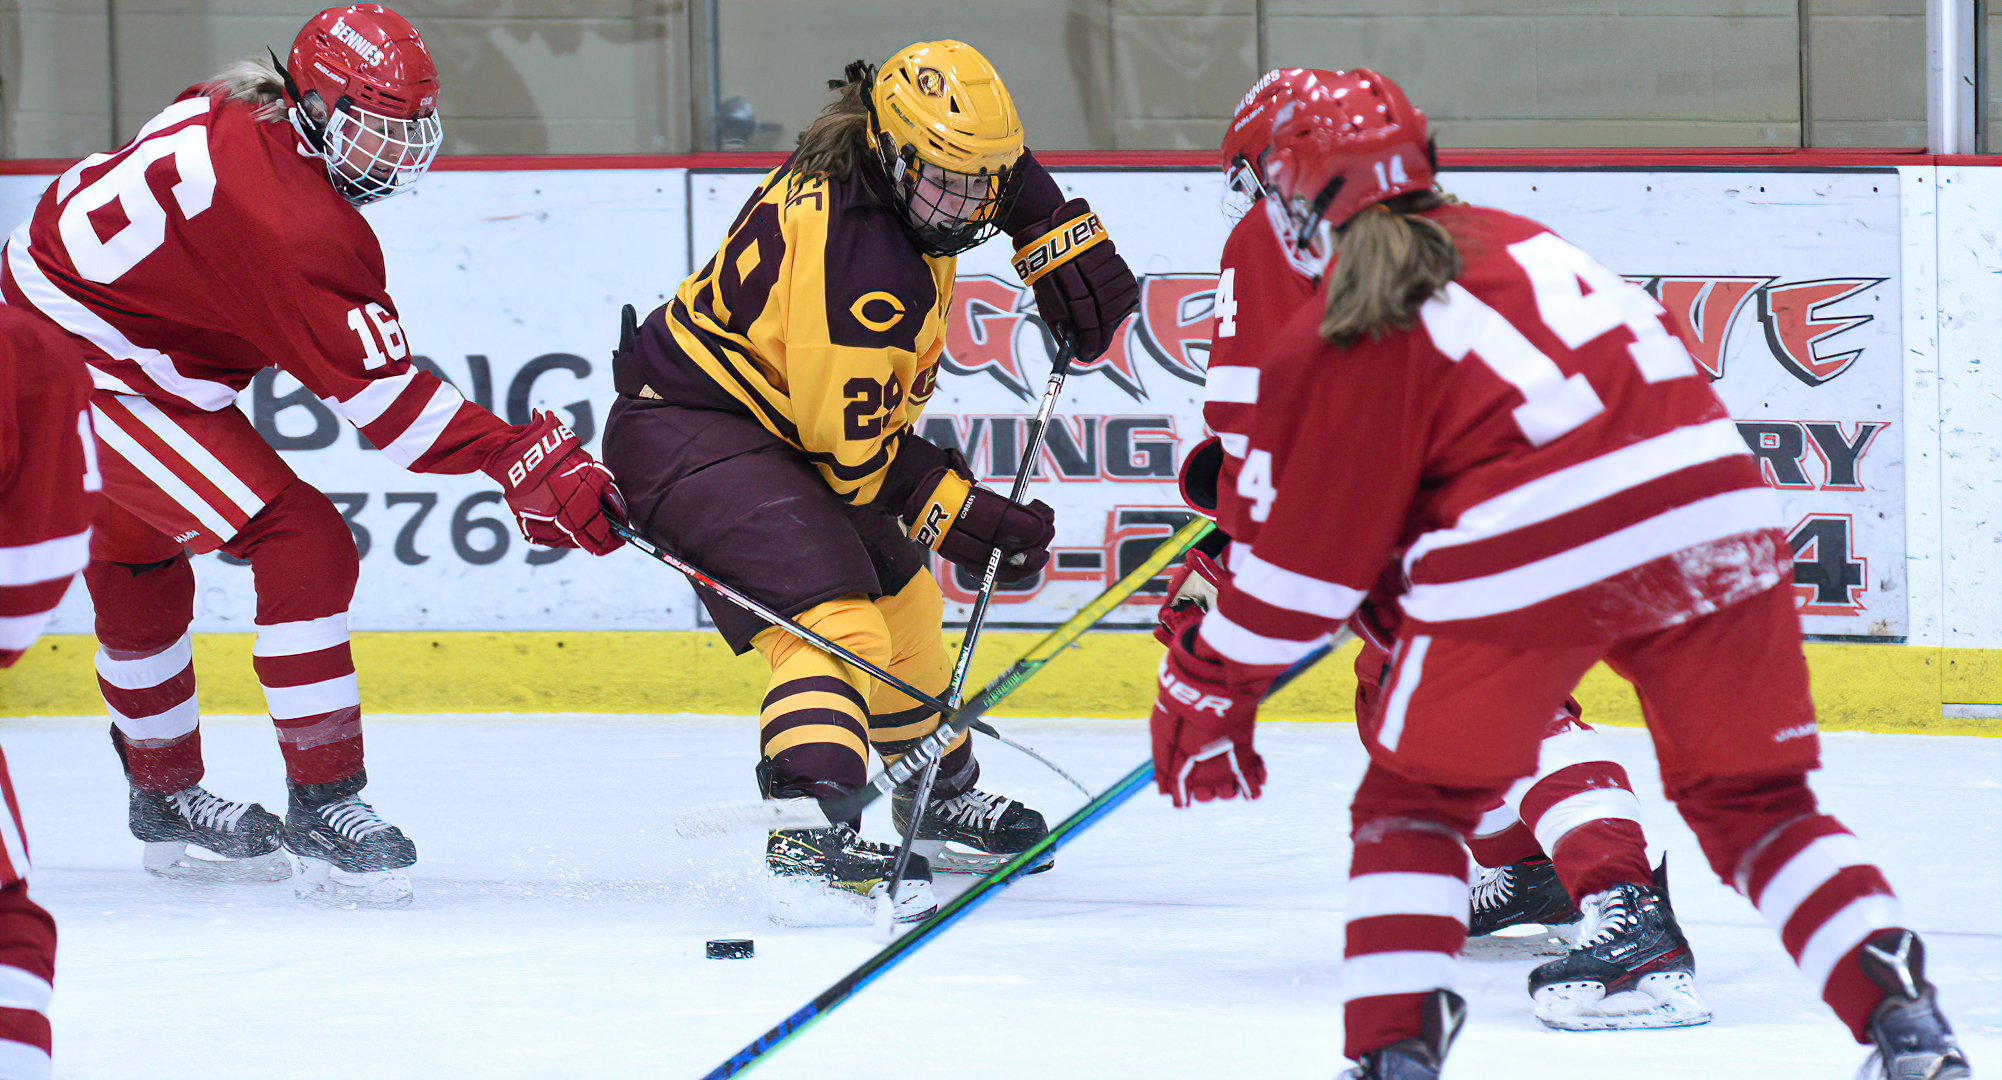 Sophomore Jerica Friese carries the puck towards the goal in between three St. Ben's defenders during the Cobbers' 1-1 OT tie in the series finale.